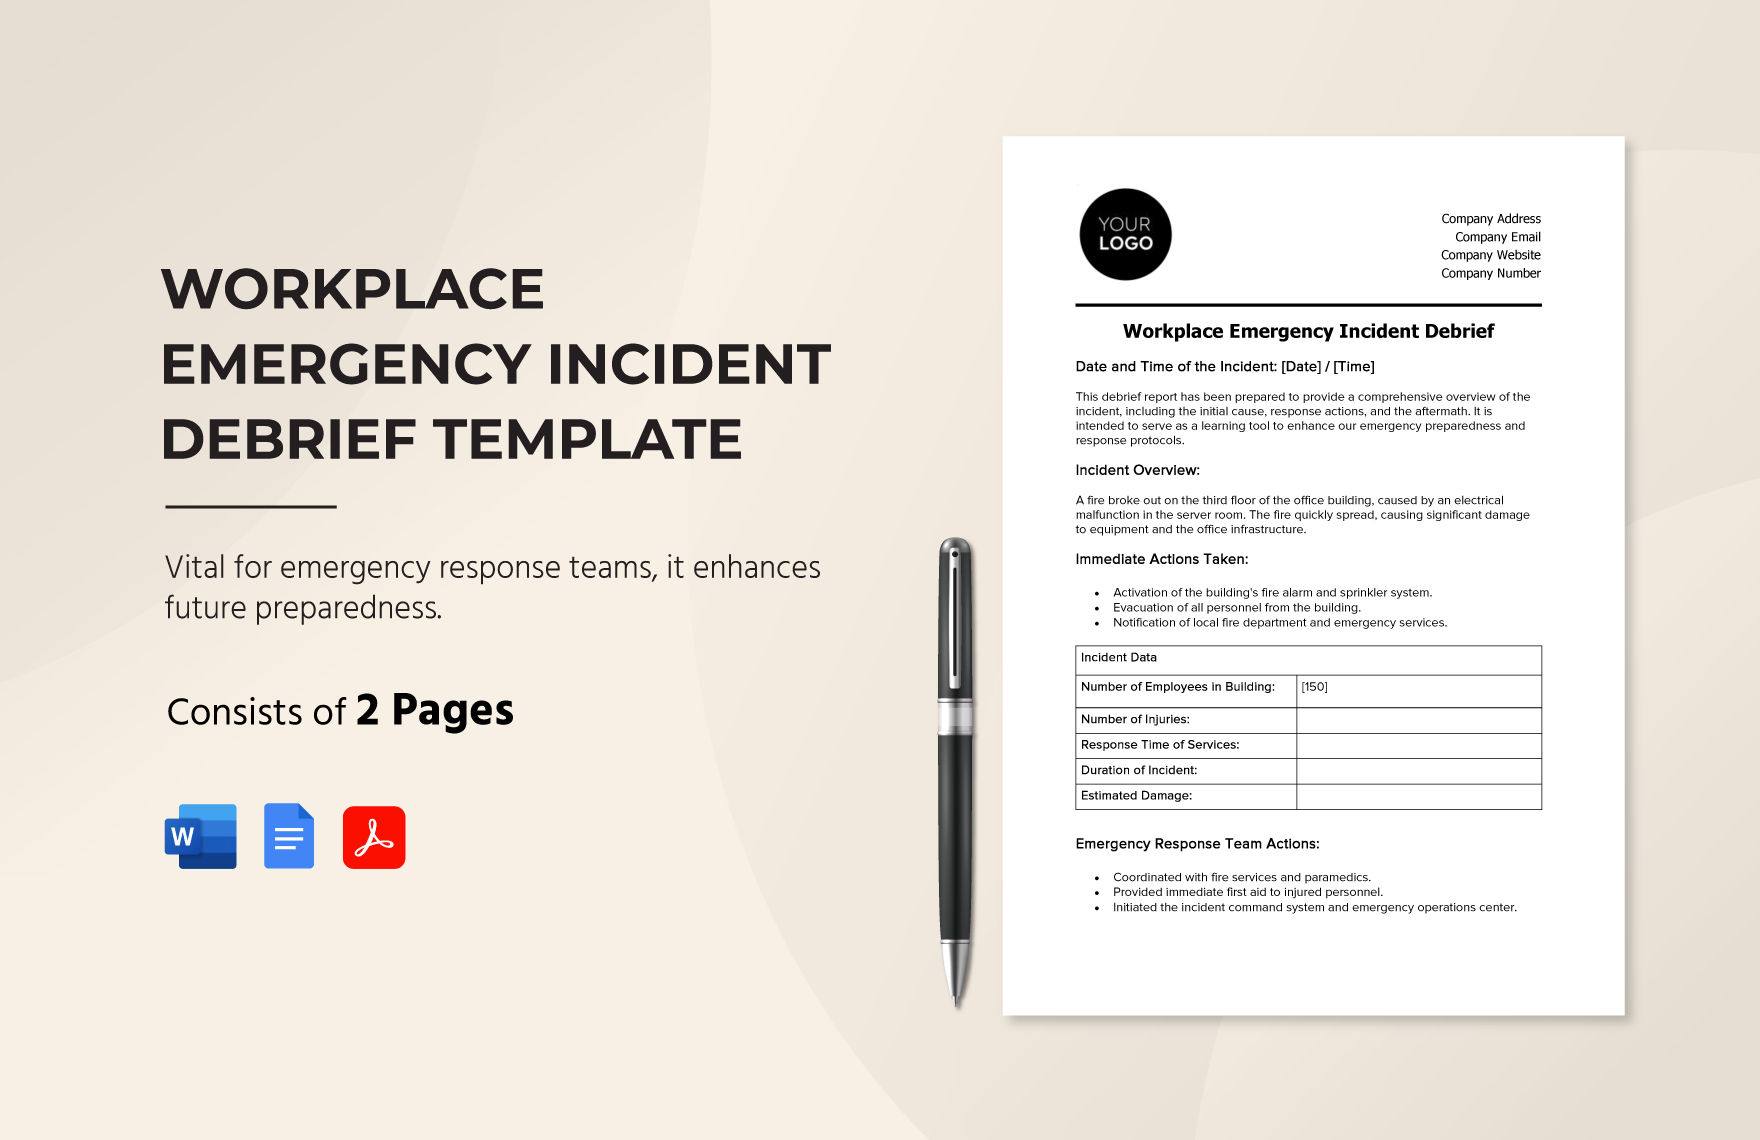 Workplace Emergency Incident Debrief Template